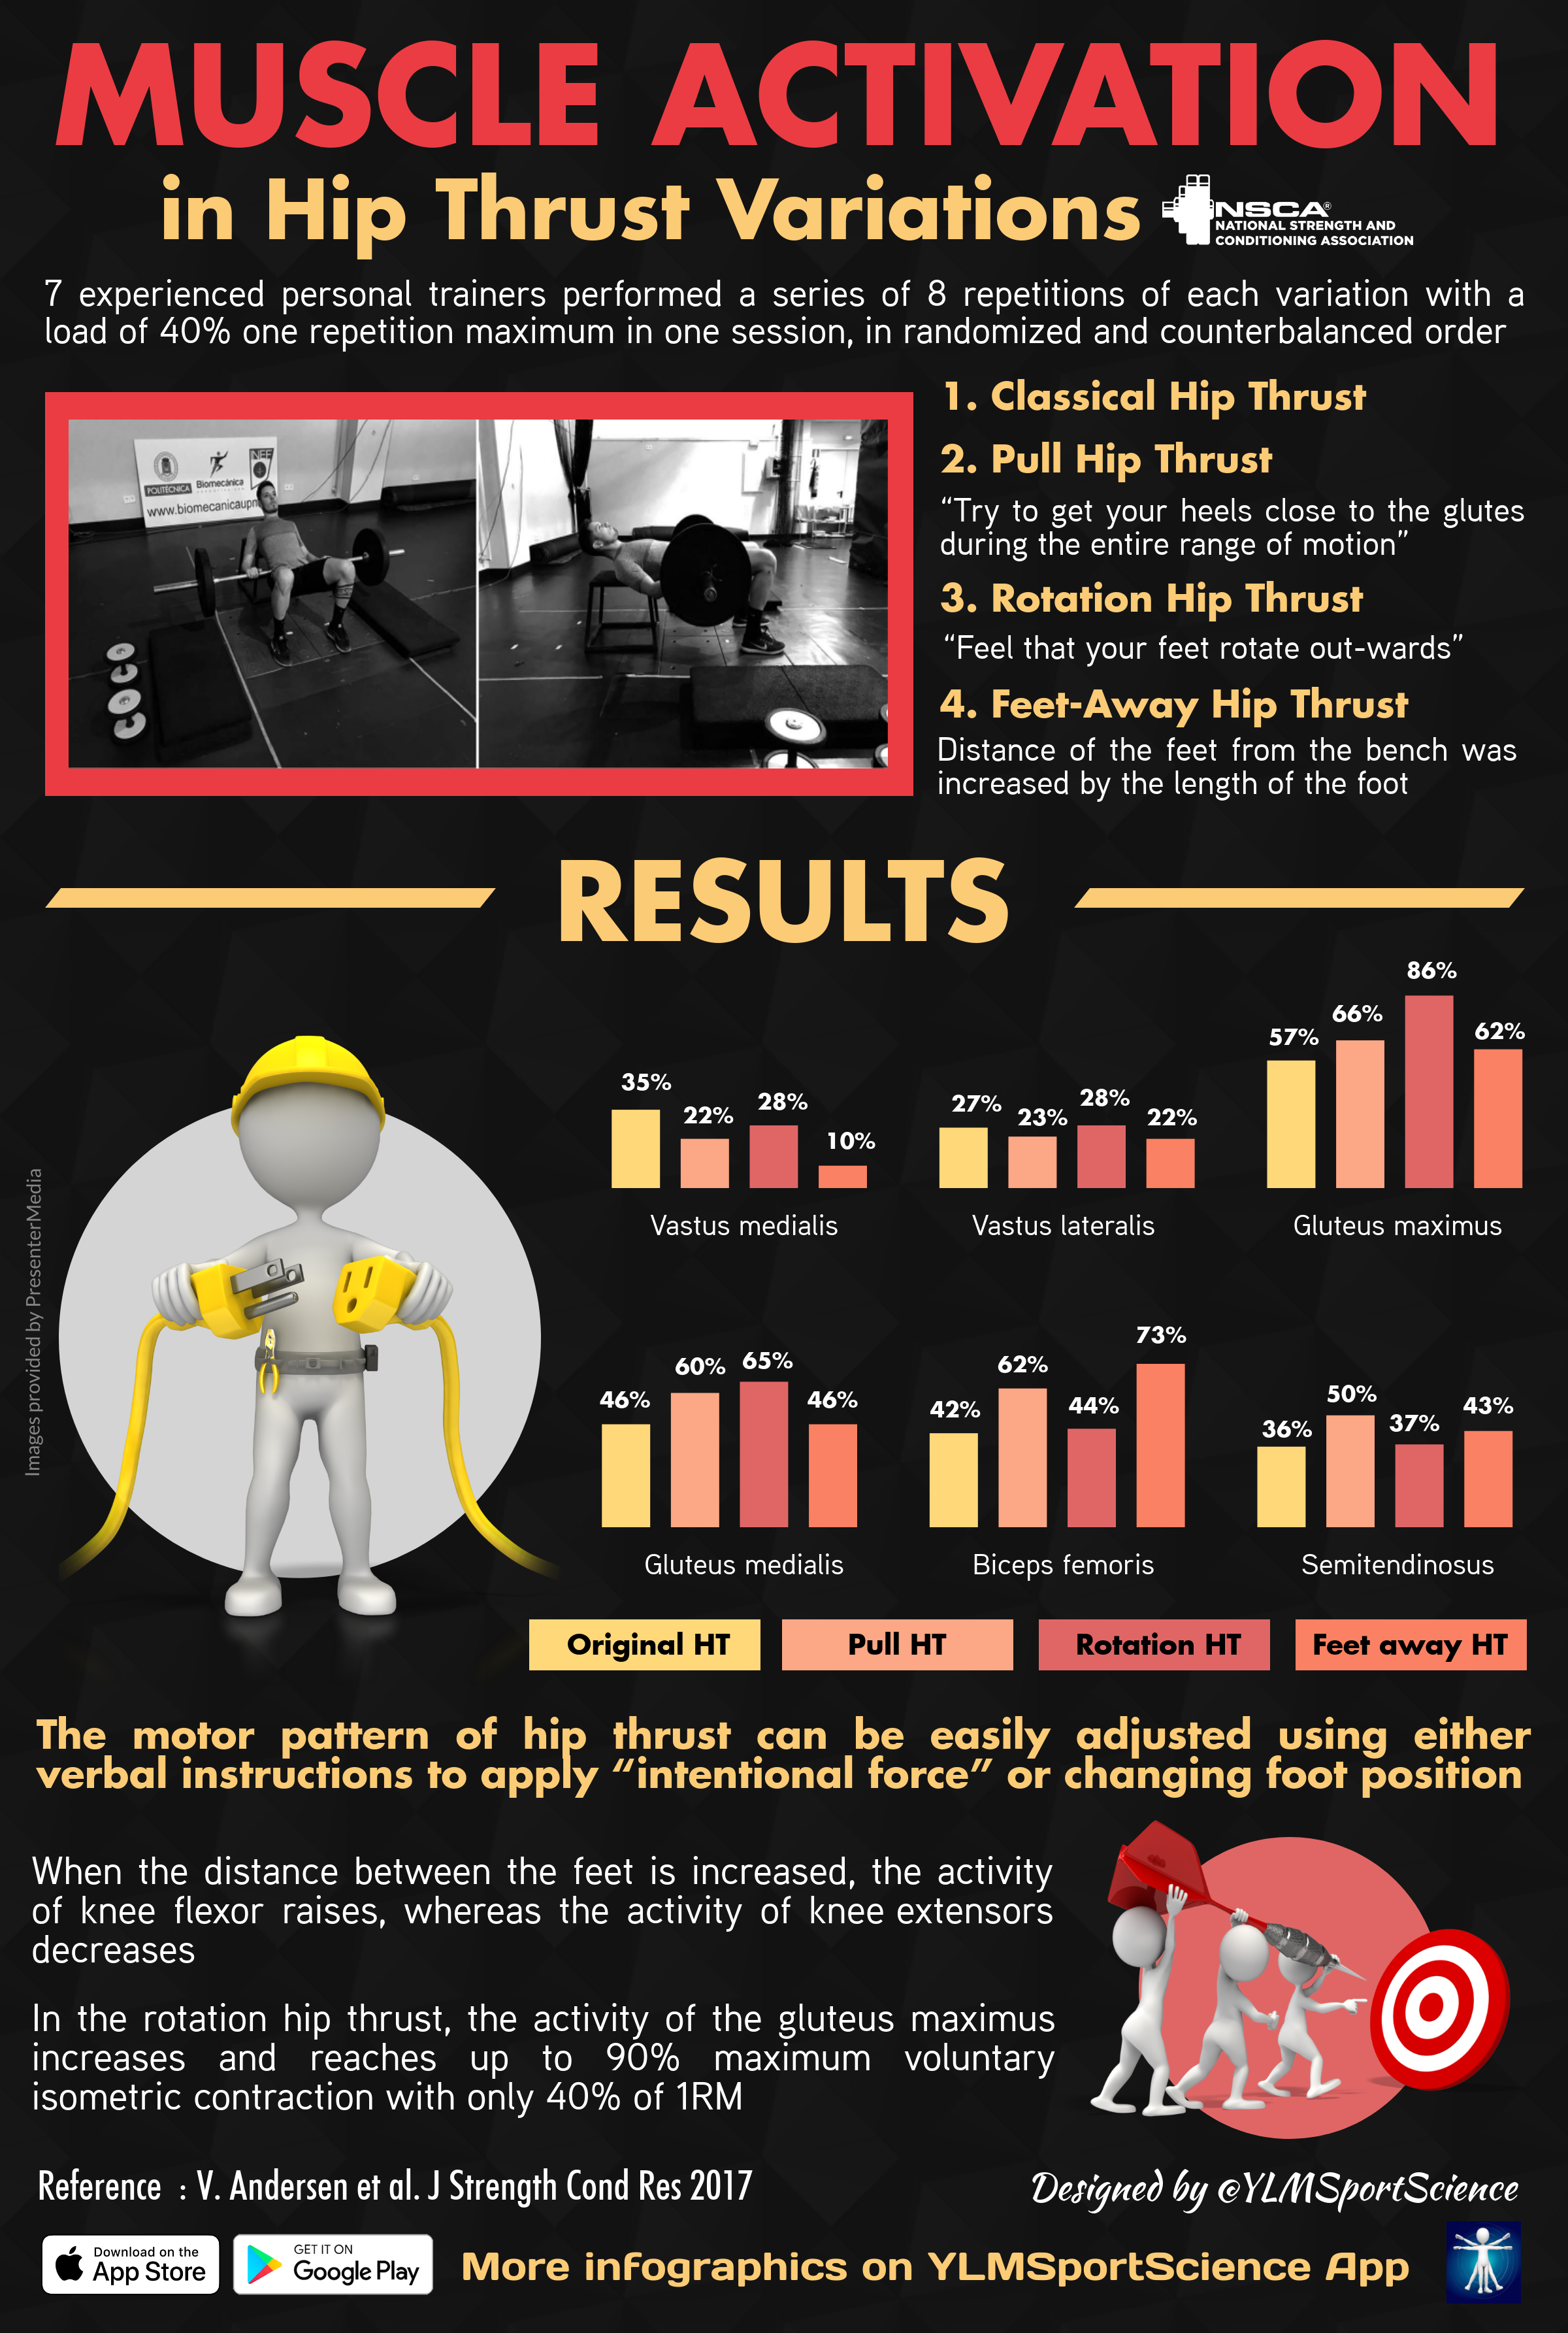 This infographic looks at the percentages of optimal muscle activation in variations of the hip thrust.